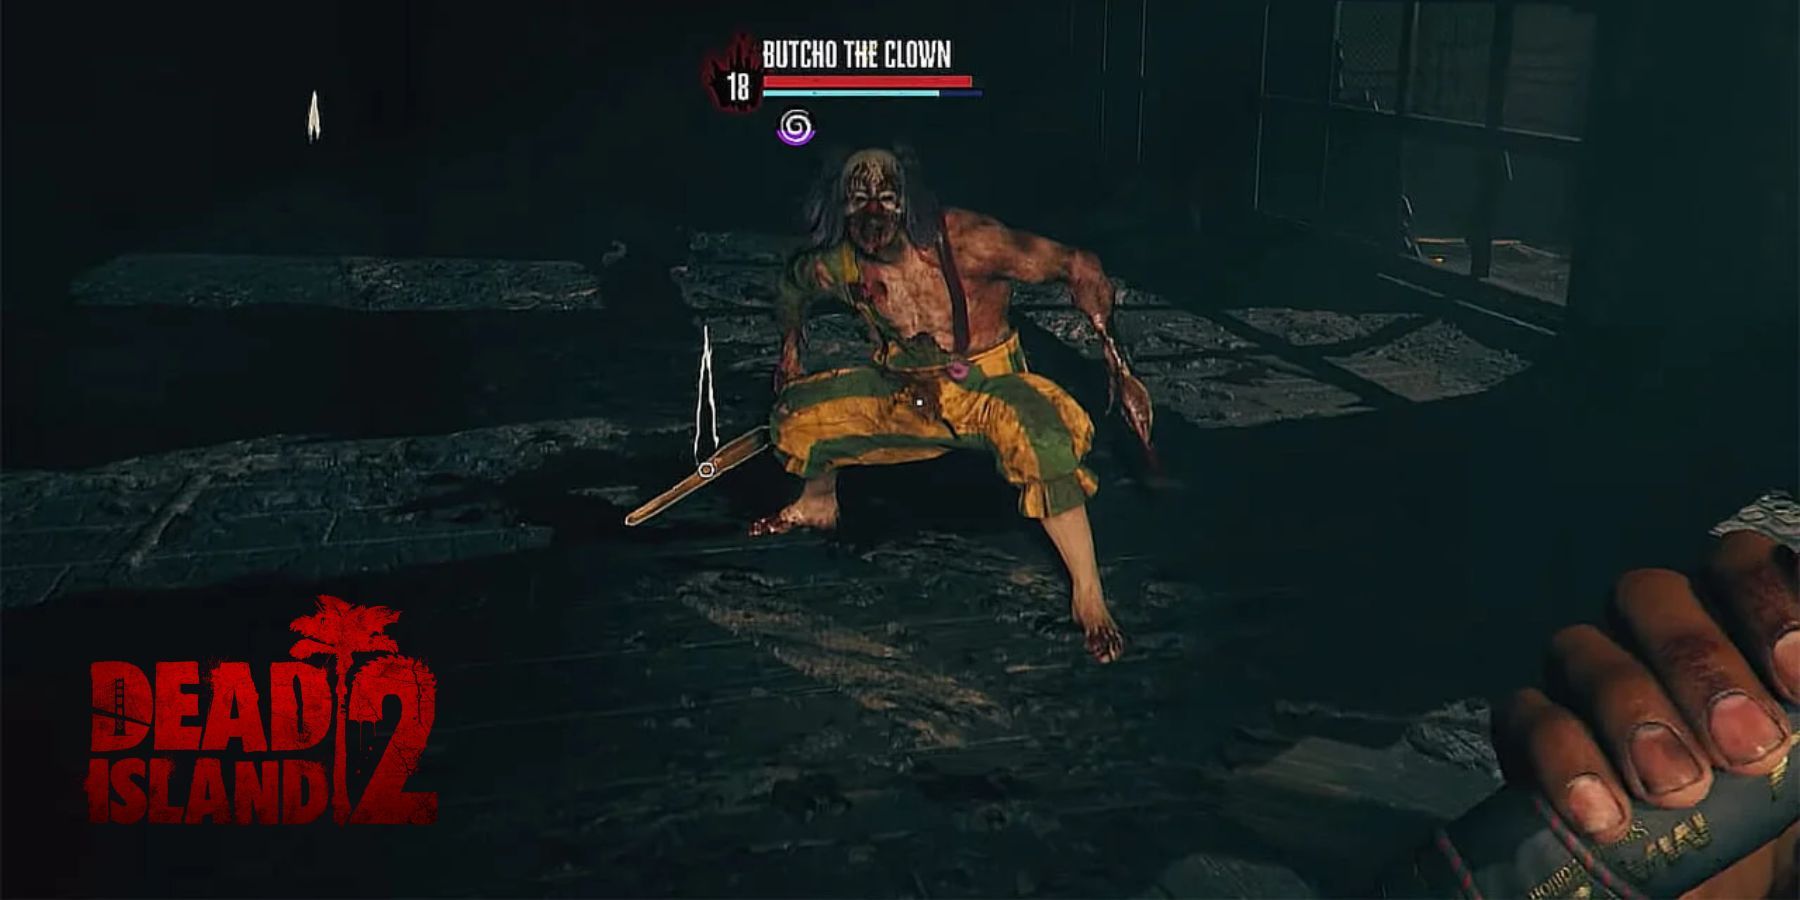 Dead Island 2 Boss Butcho the Clown Ready To Attack